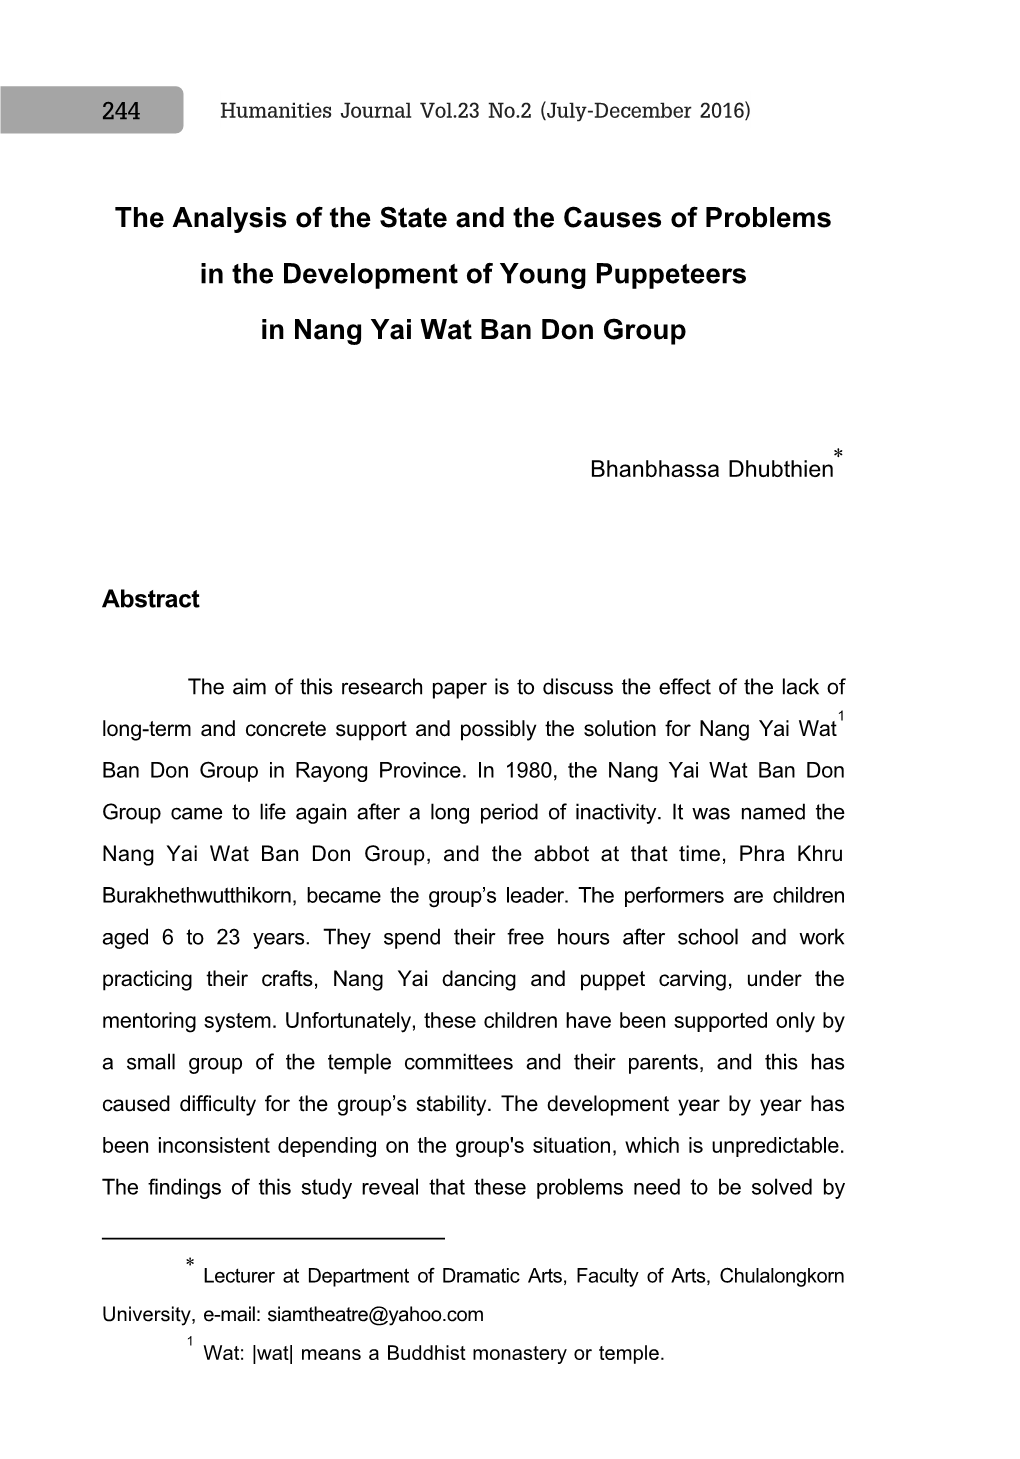 The Analysis of the State and the Causes of Problems in the Development of Young Puppeteers in Nang Yai Wat Ban Don Group